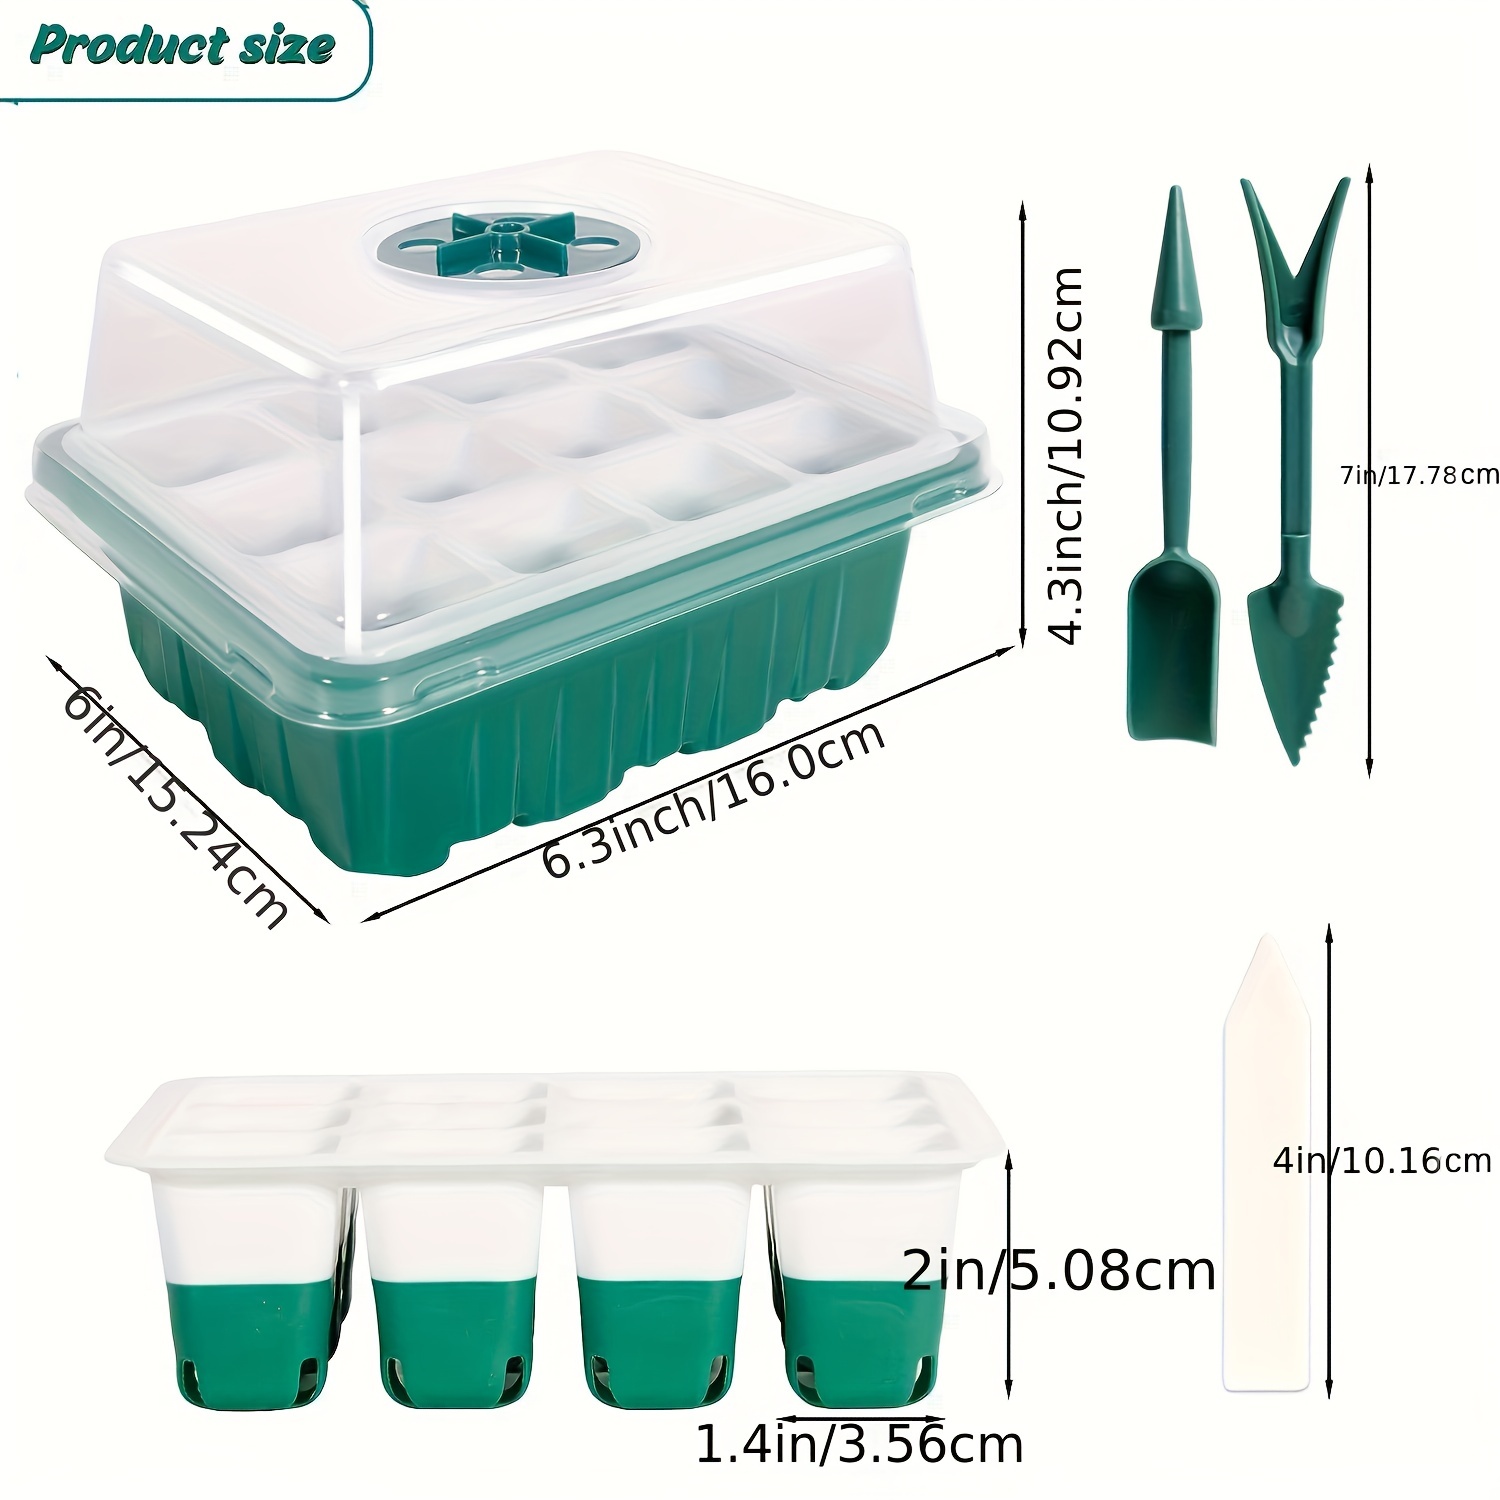 Seed Starter Tray, 5pcs Reusable Seed Starter Kit, Silicone